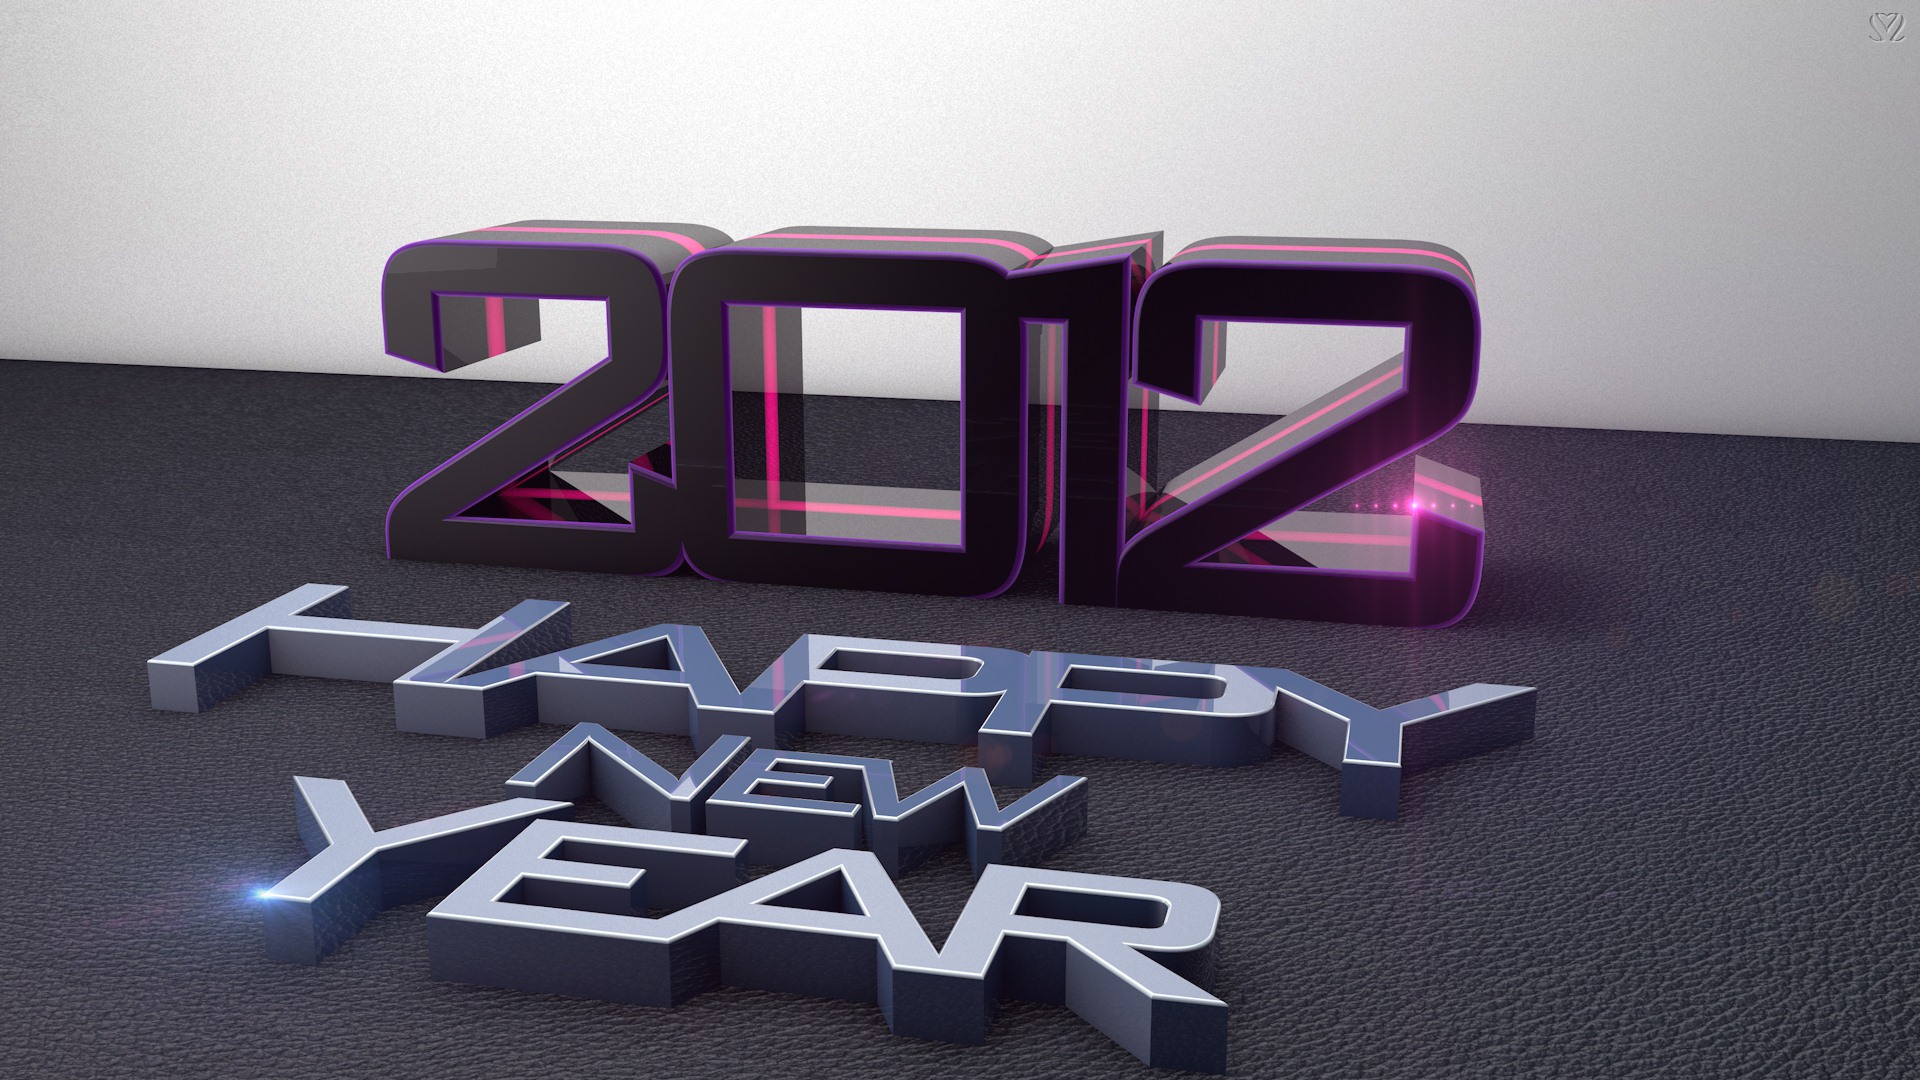 2012 New Year wallpapers (1) #6 - 1920x1080